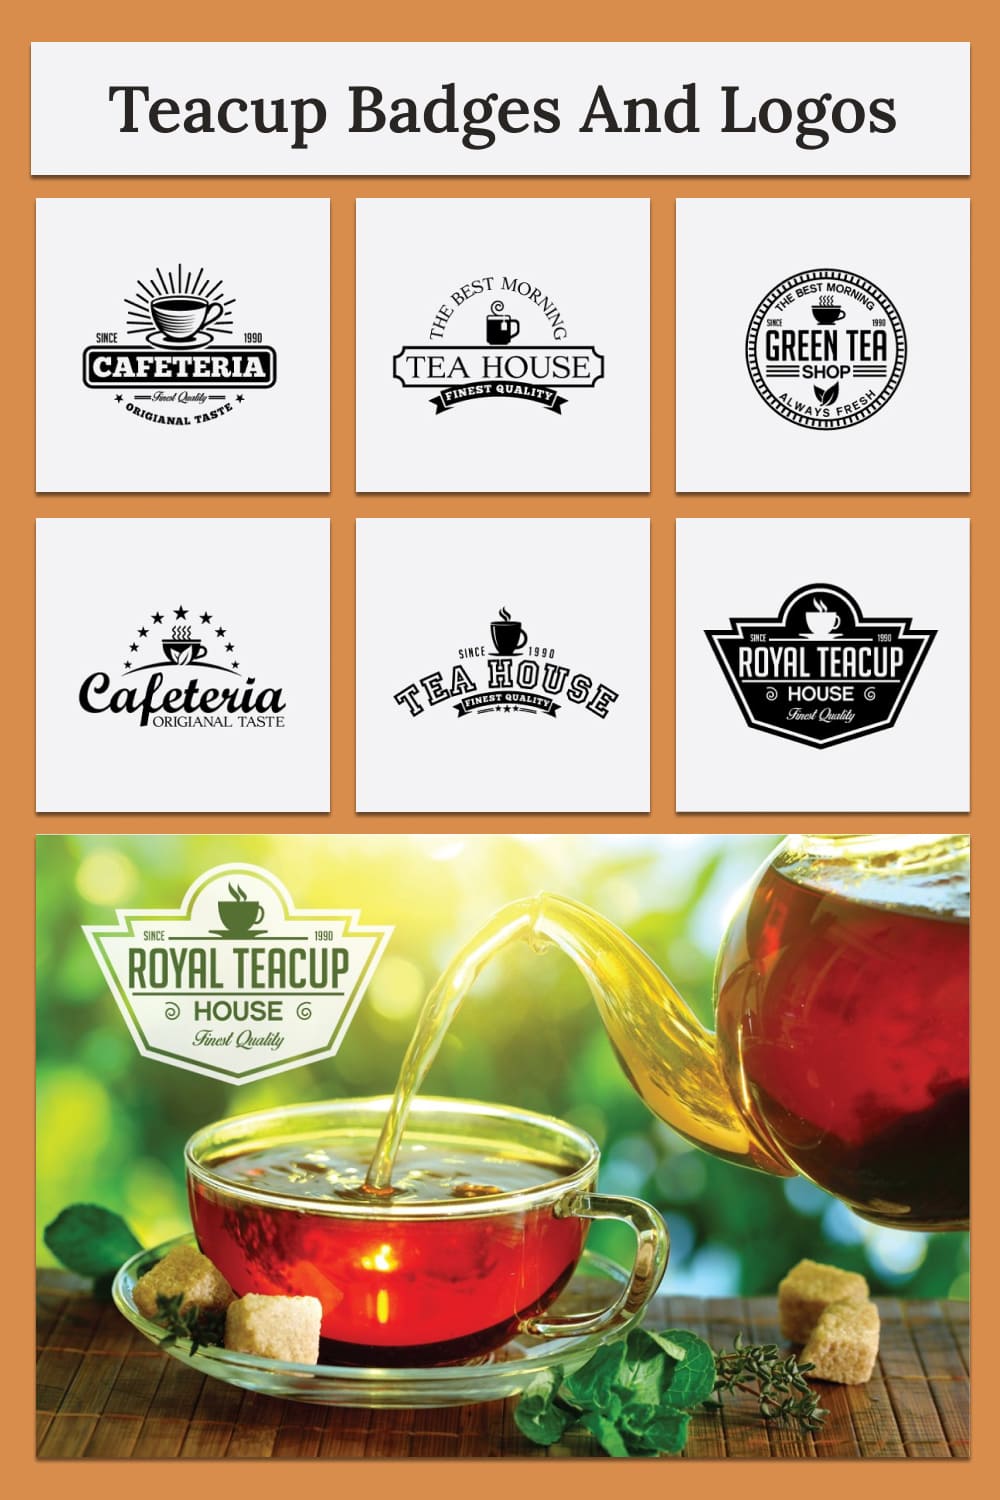 Teacup badges and logos - pinterest image preview.